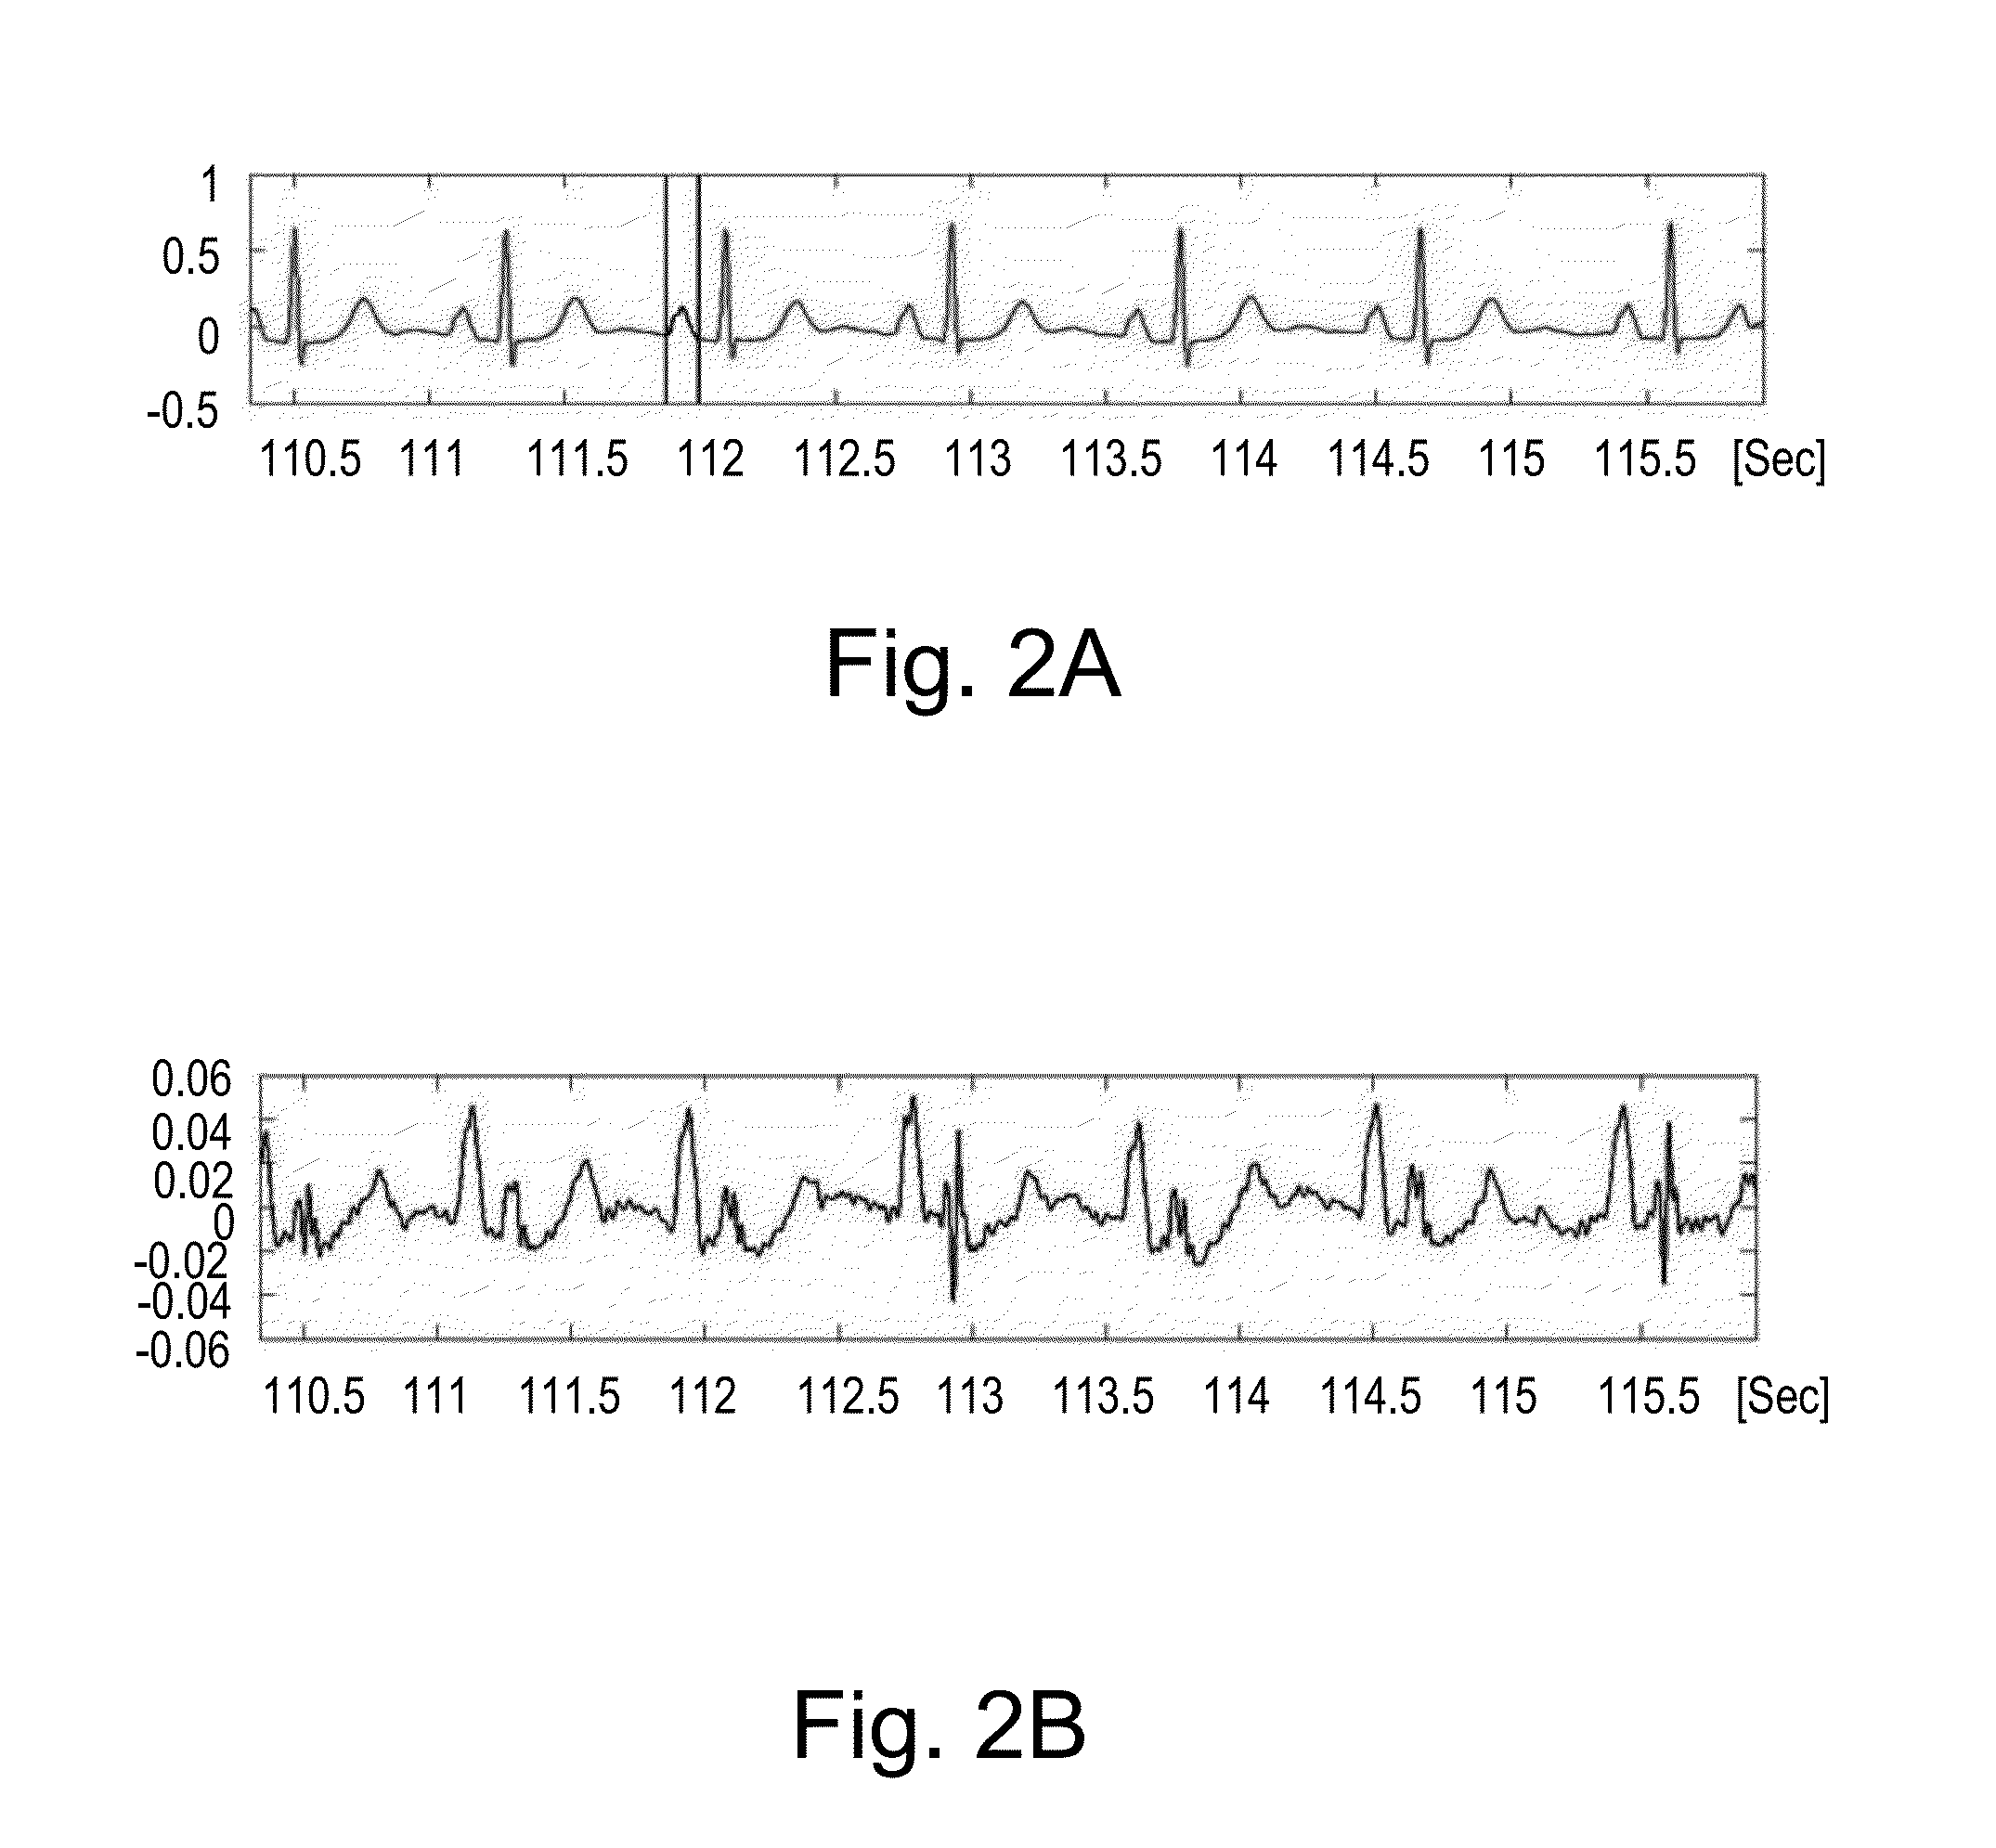 Method and system for detecting P-waves in the surface ECG signal